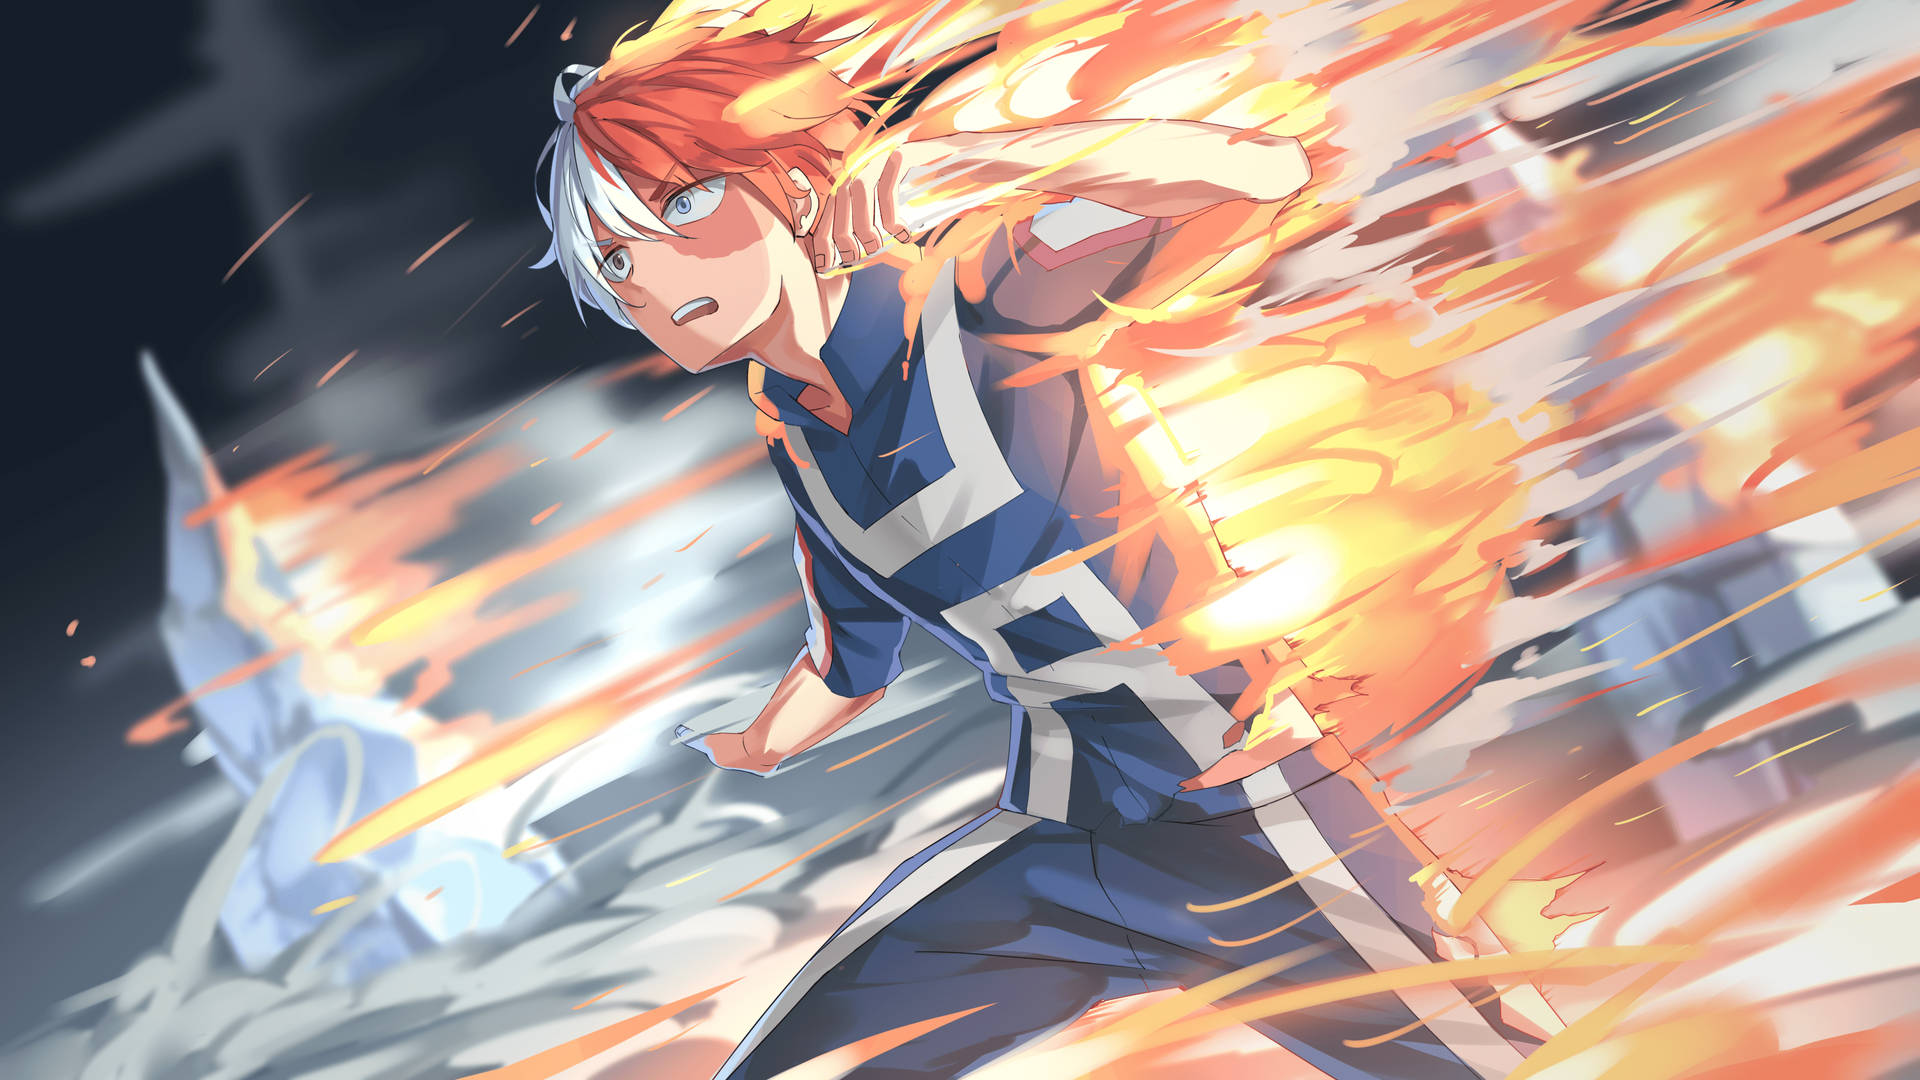 "Todoroki faces a powerful opponent in battle". Wallpaper